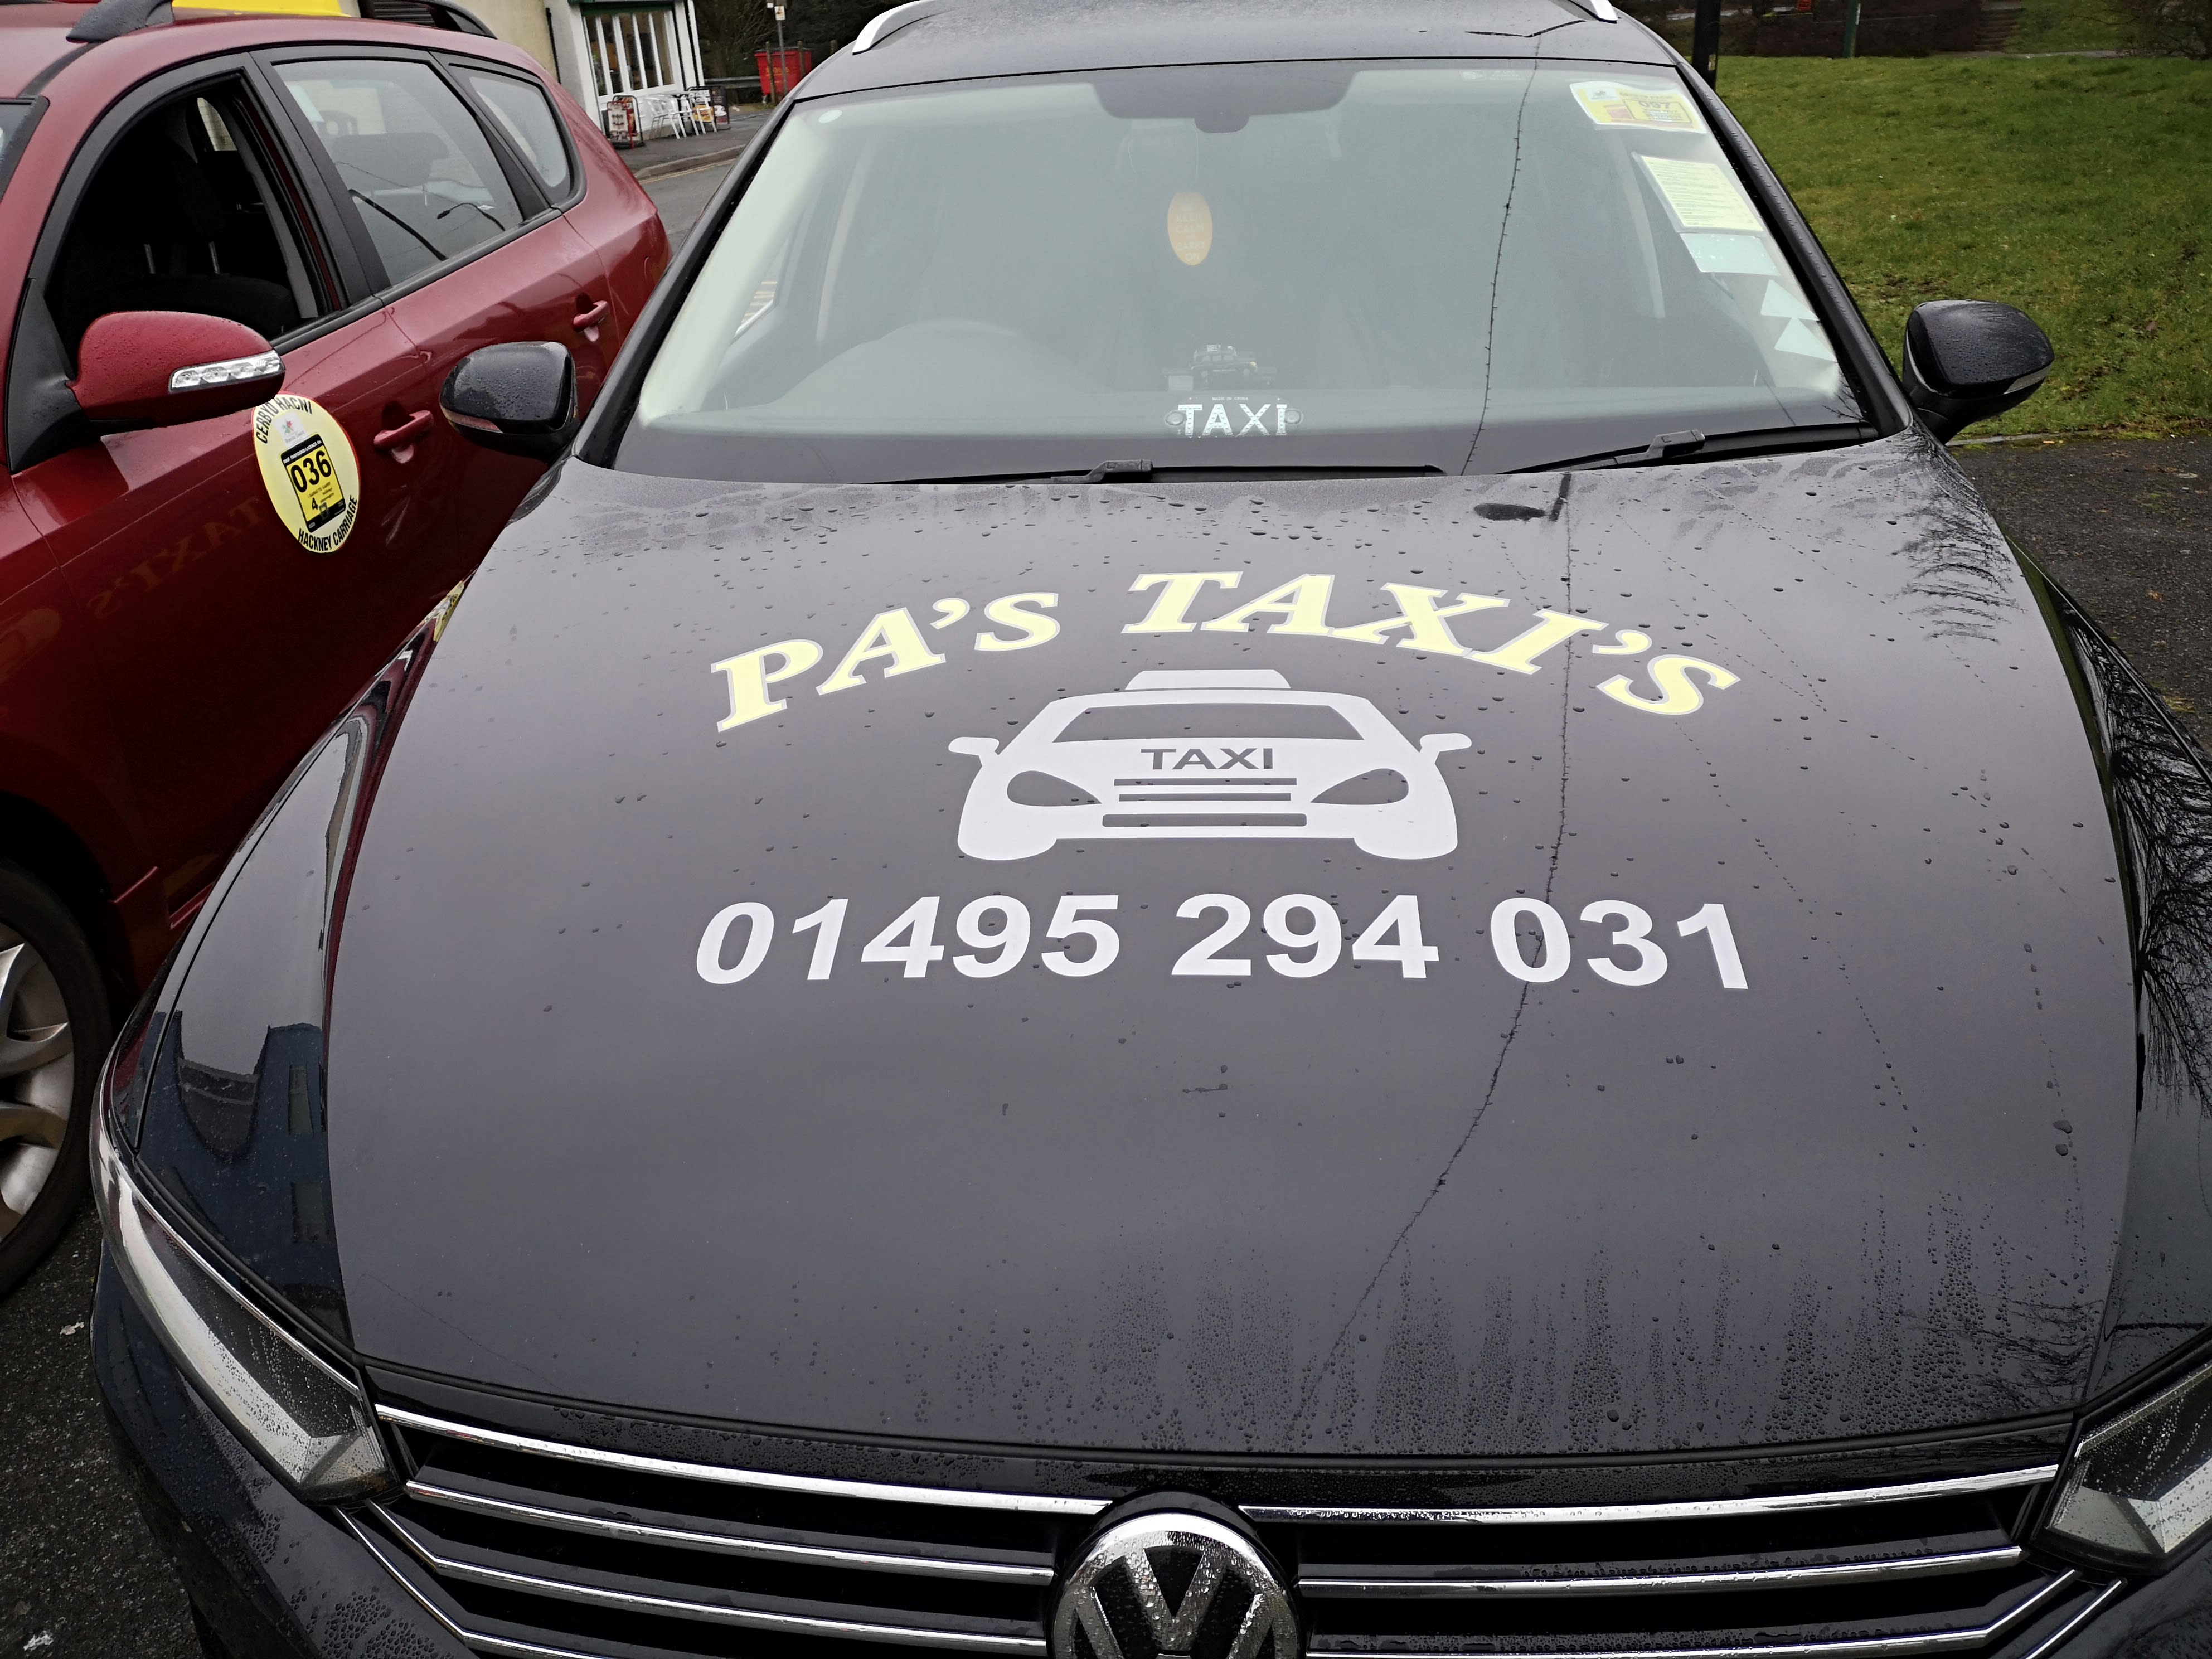 PA's Taxi's